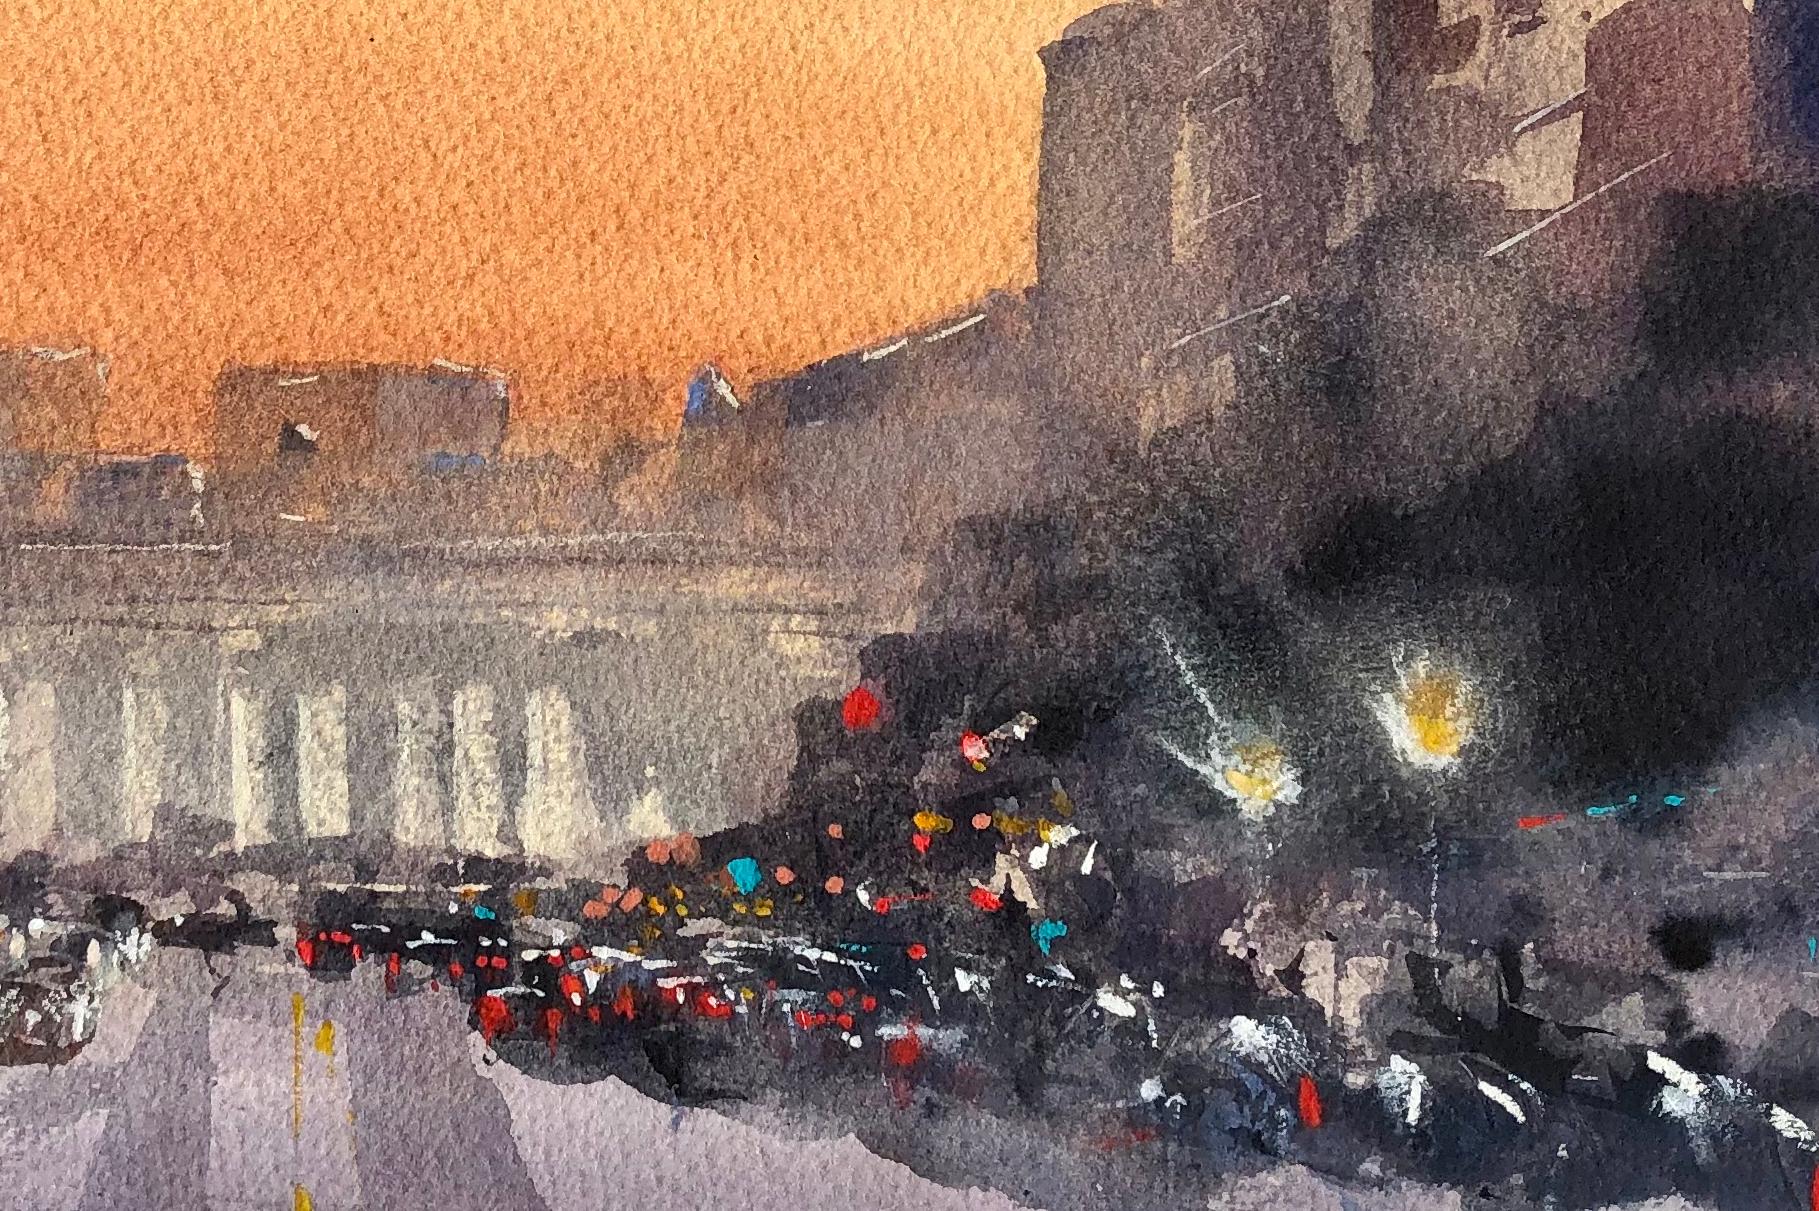 <p>Artist Comments<br>Artist James Nyika paints a glimpse of a busy cityscape during the sunset. He captures a sense of stillness and tranquility in spite of the traffic and commotion. 